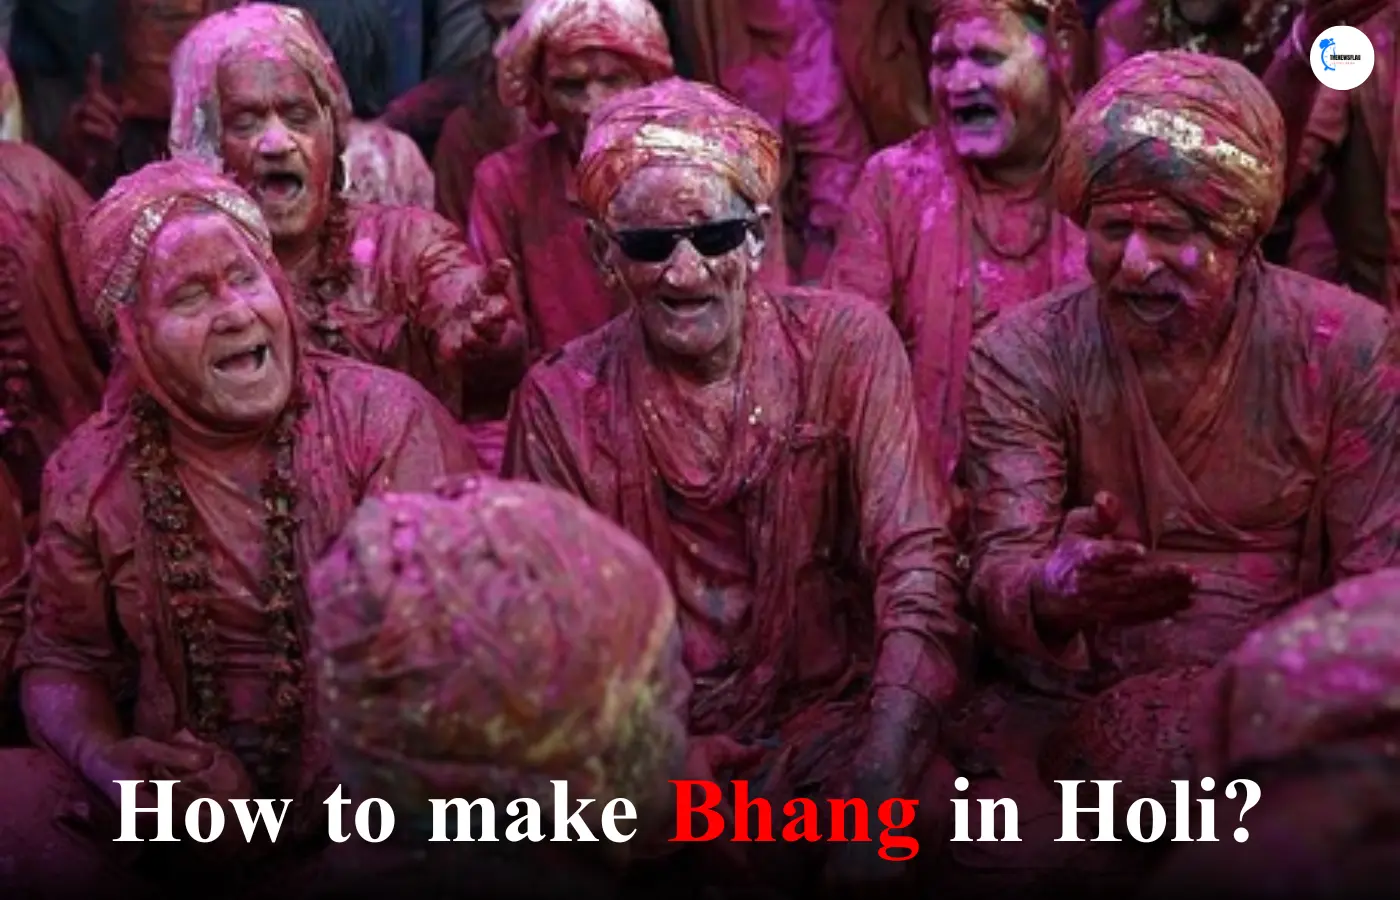 How to make Bhang in Holi?